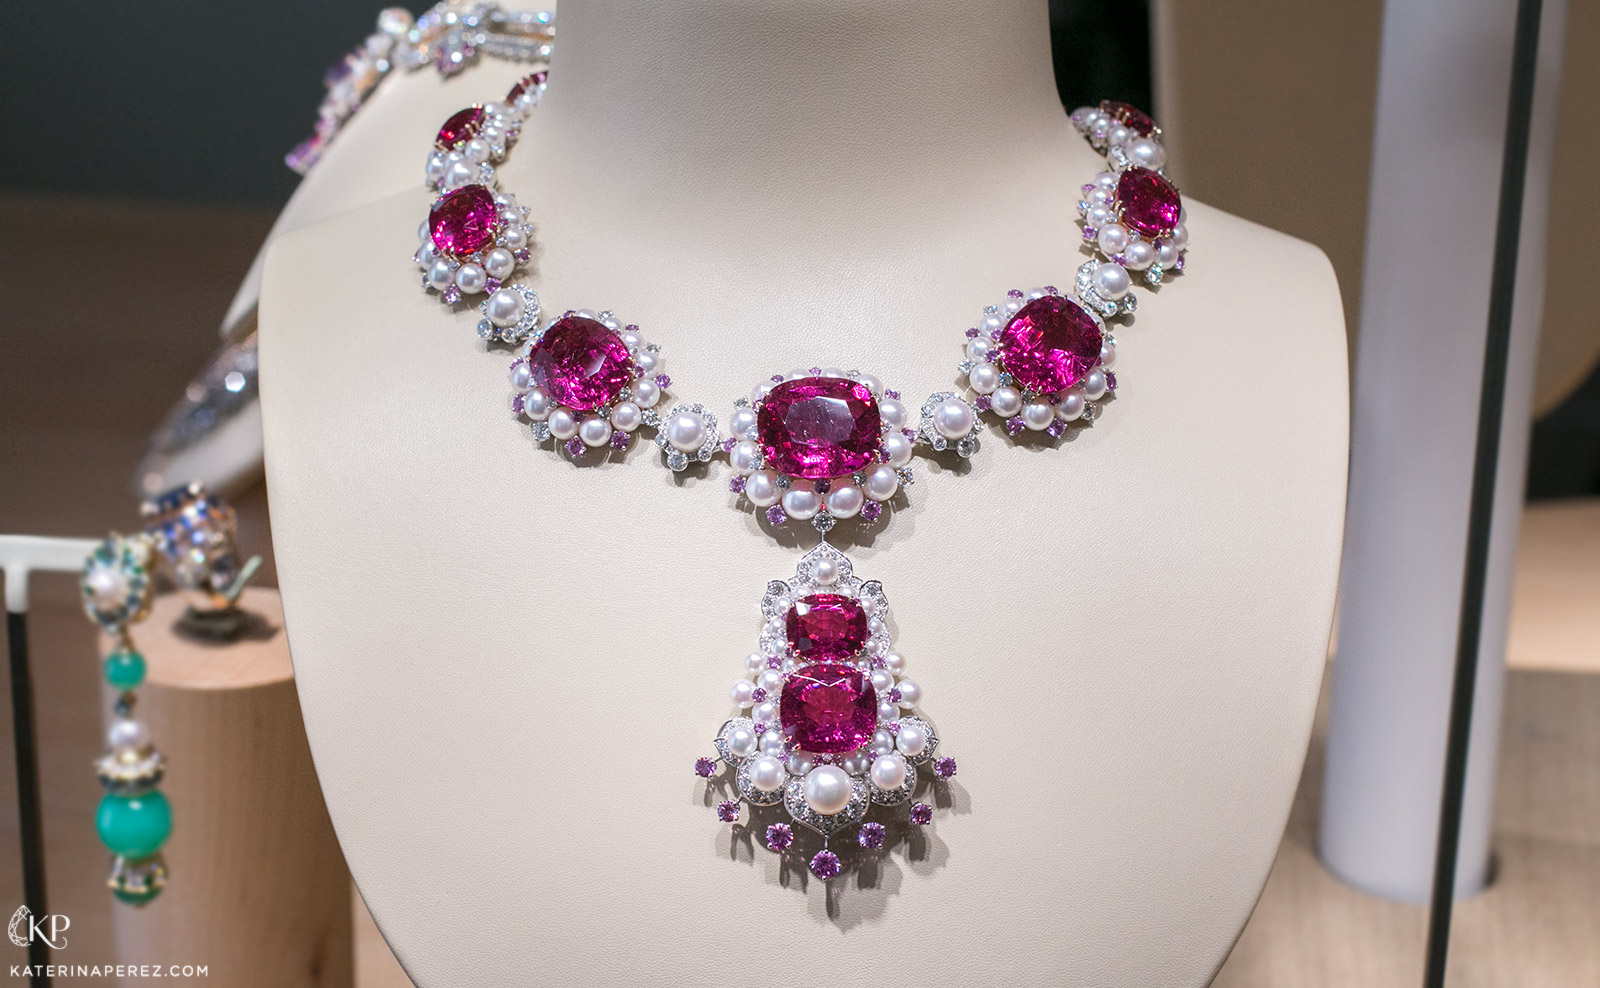 Van Cleef & Arpels ‘Demoiselle Gracieuse’ necklace from the ‘Quatre de contes Grimm’ collection with 12 cushion cut rubellites totalling 206.68 ct, pink sapphires, pearls and diamonds